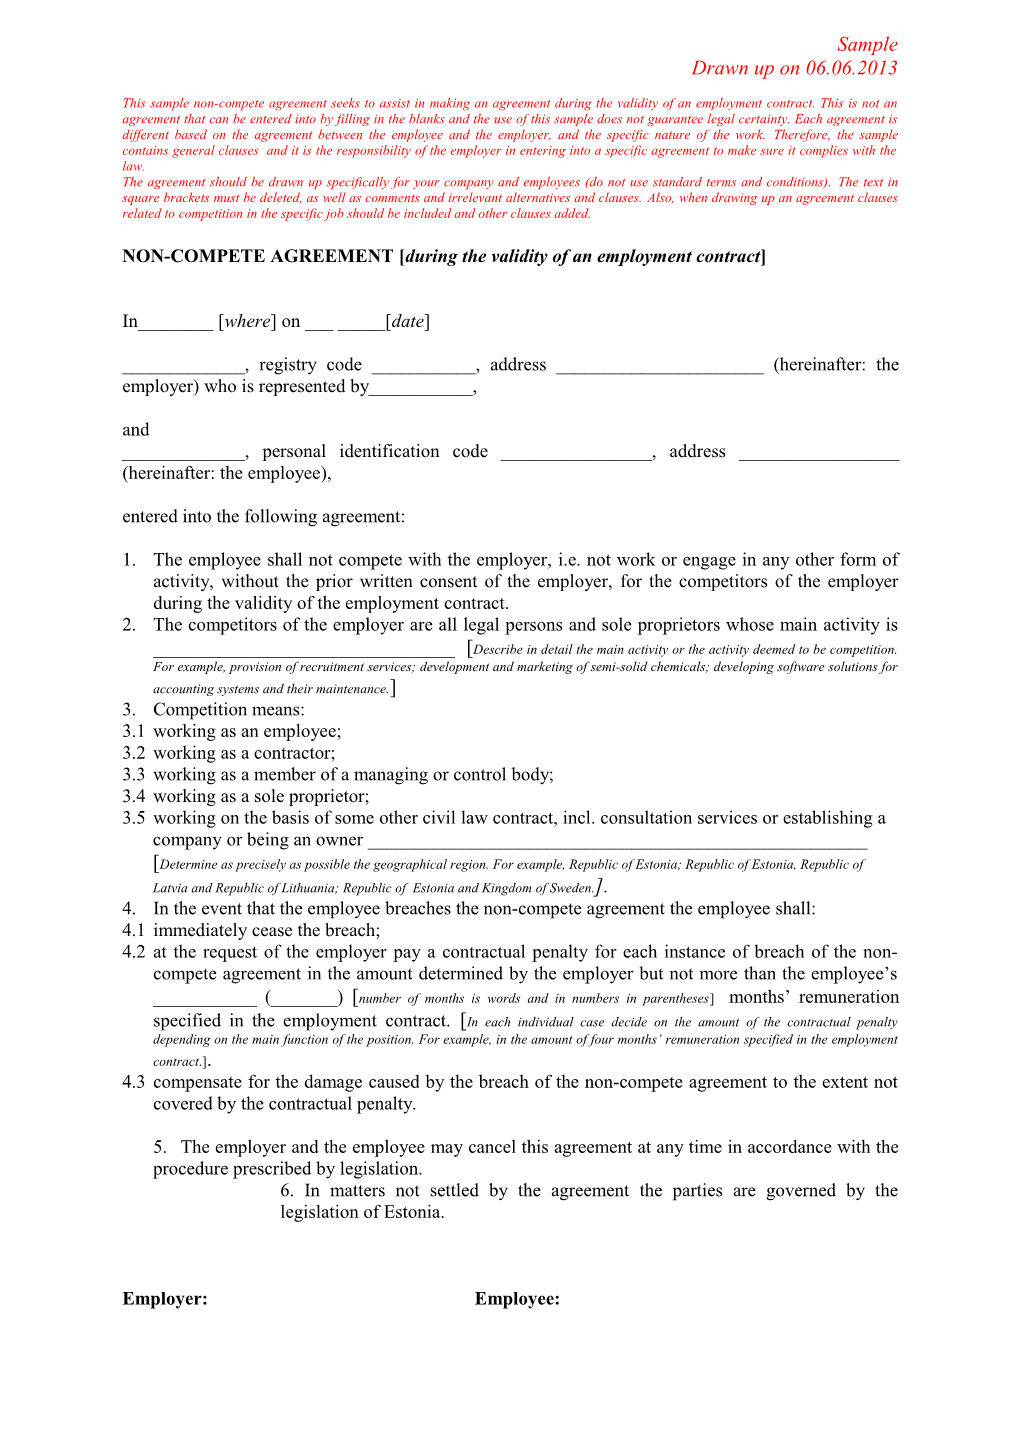 Non-Compete Agreement During the Validity of an Employment Contract